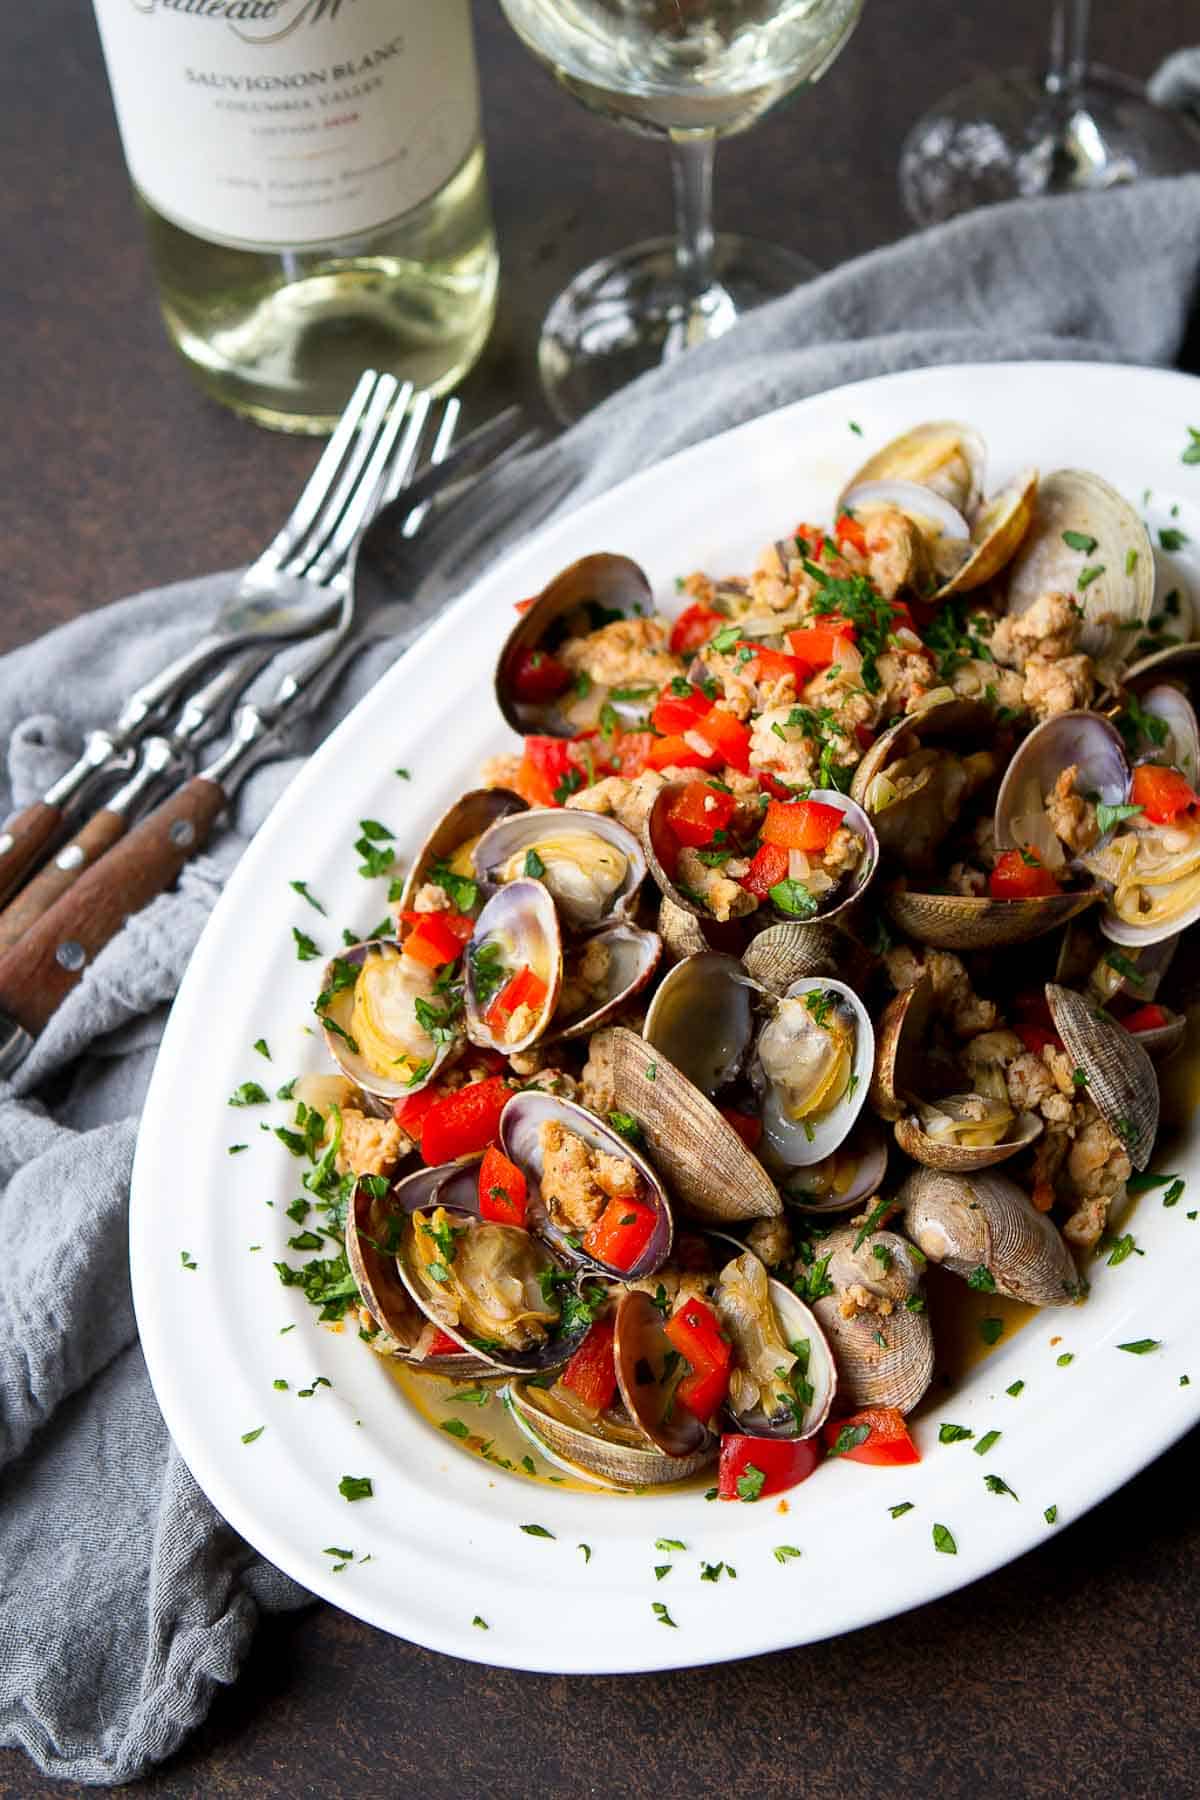 Steamed littleneck clams and sausage on a white plate, with glasses of white wine.